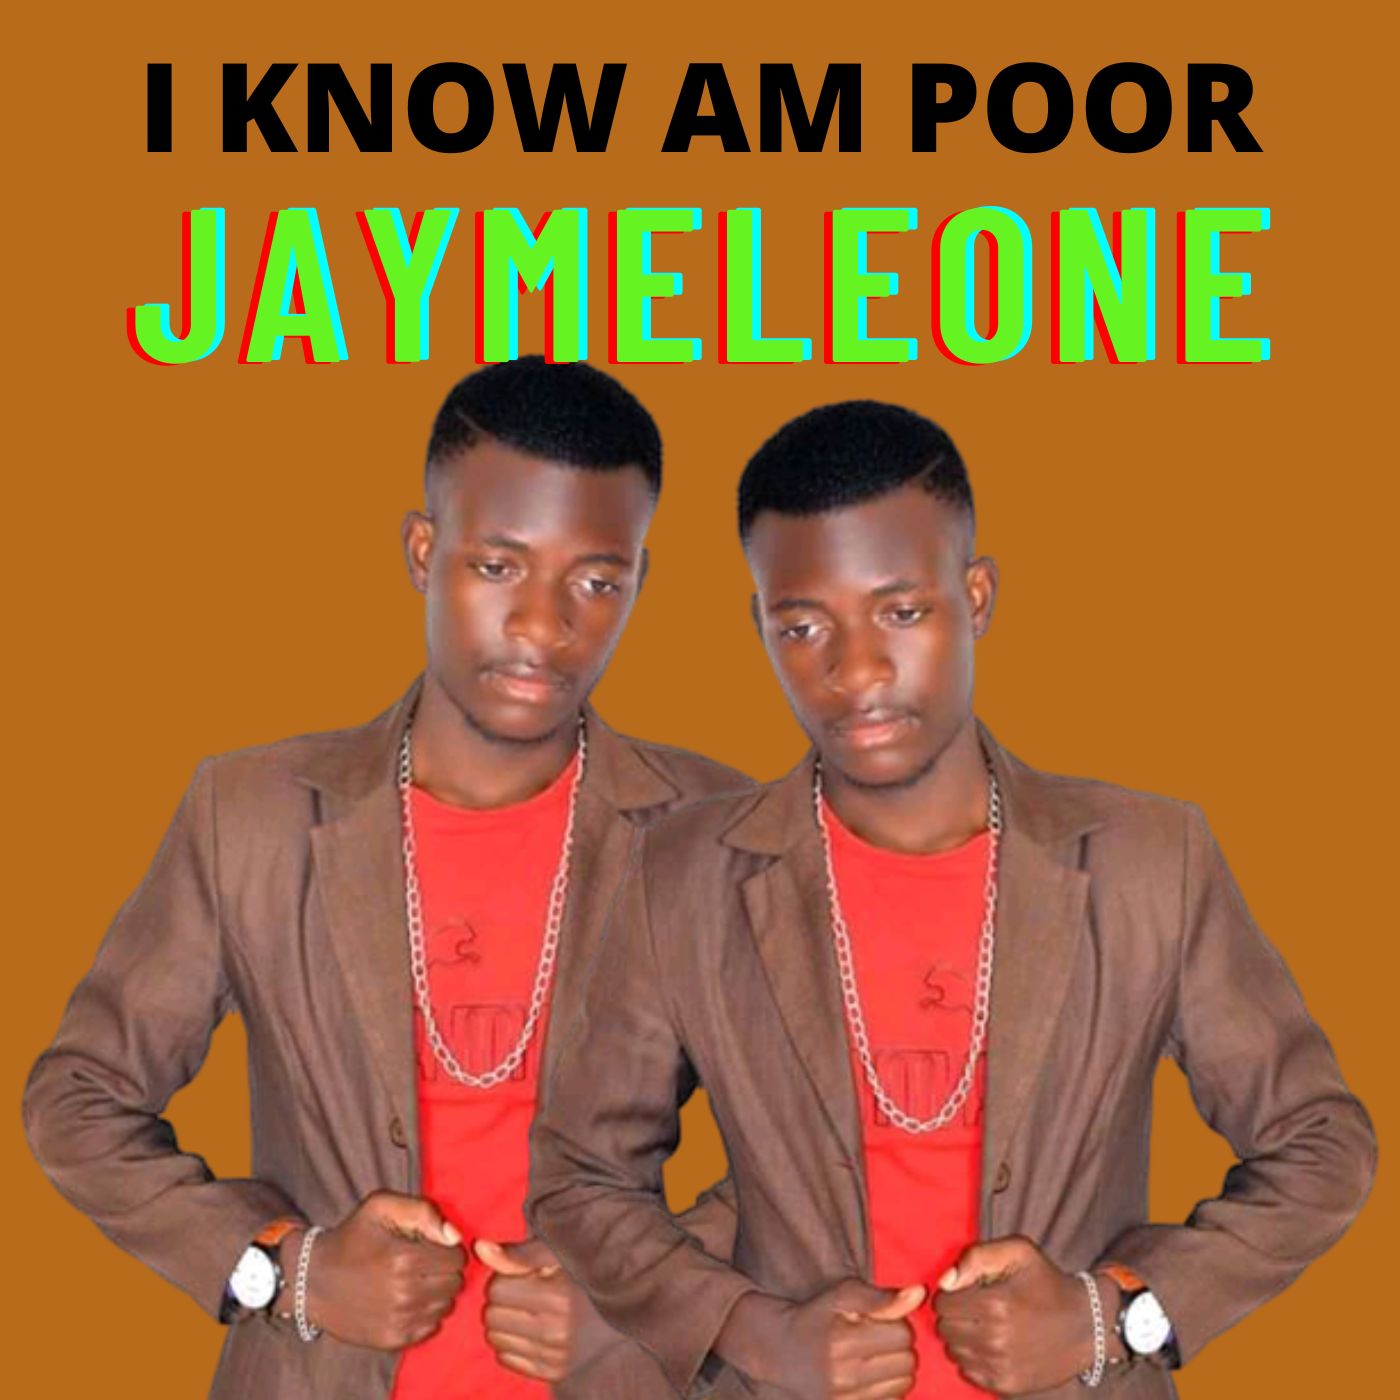 I know am poor